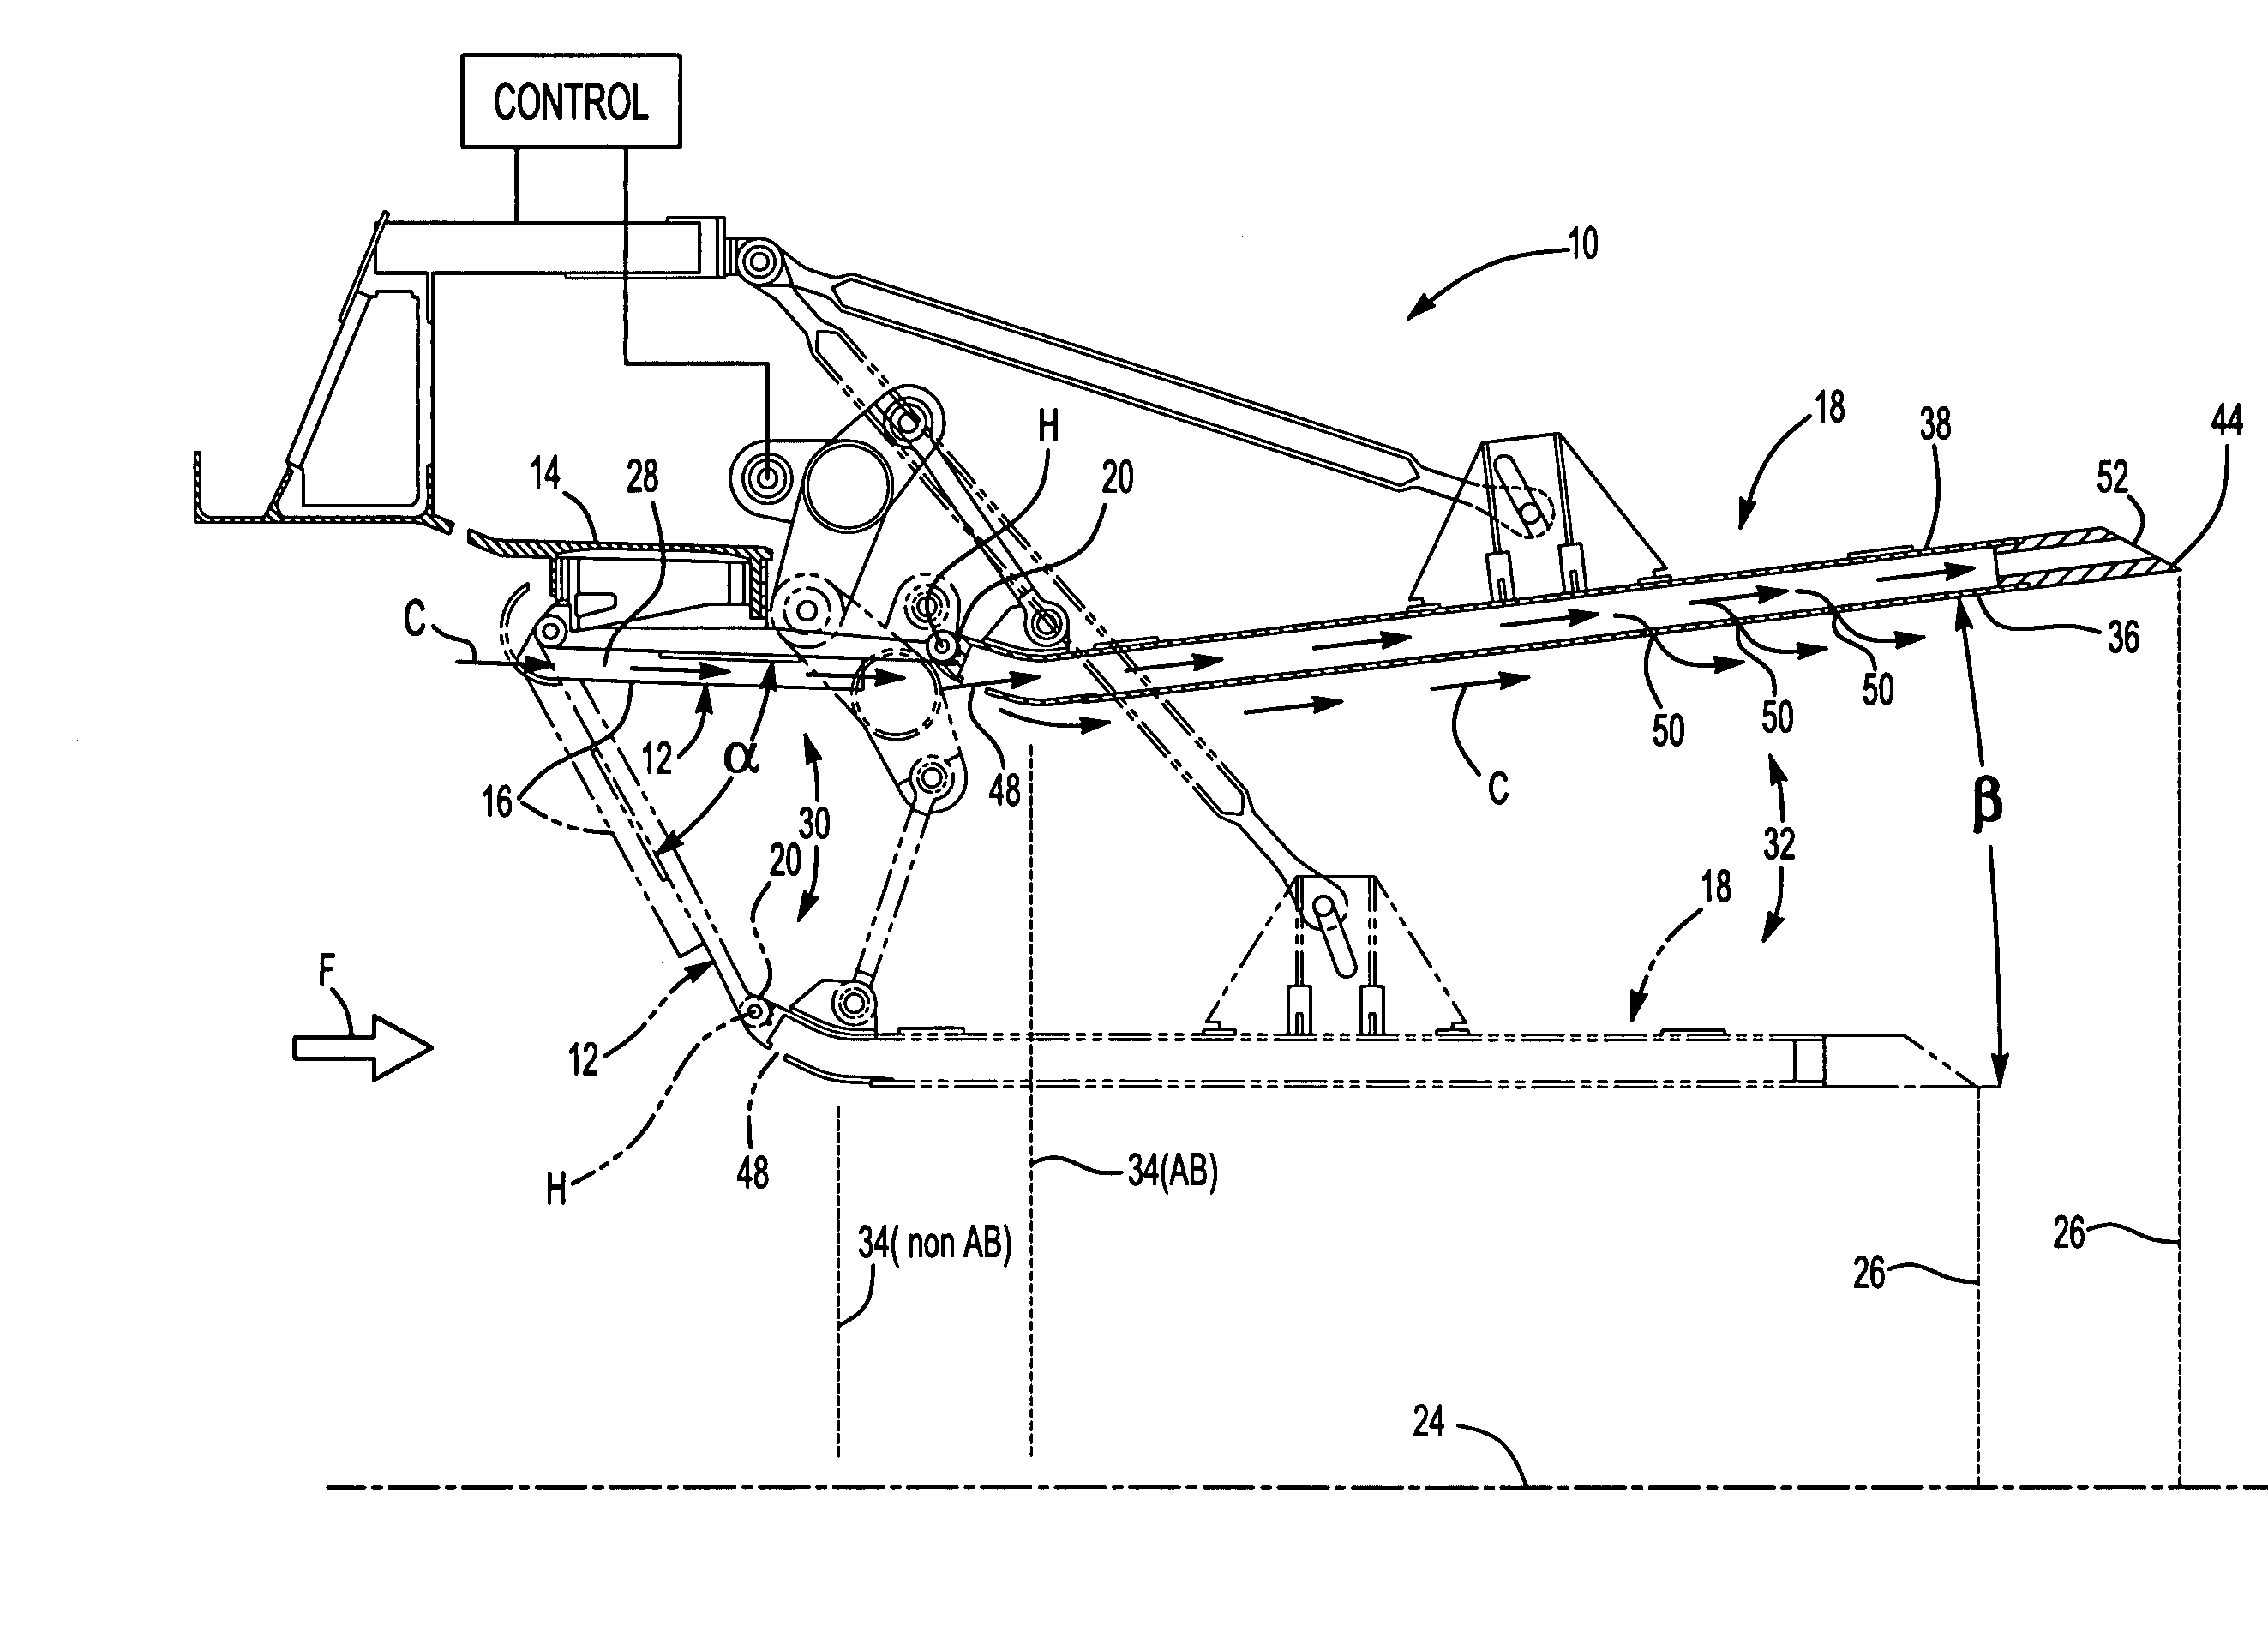 Convergent/divergent nozzle with modulated cooling